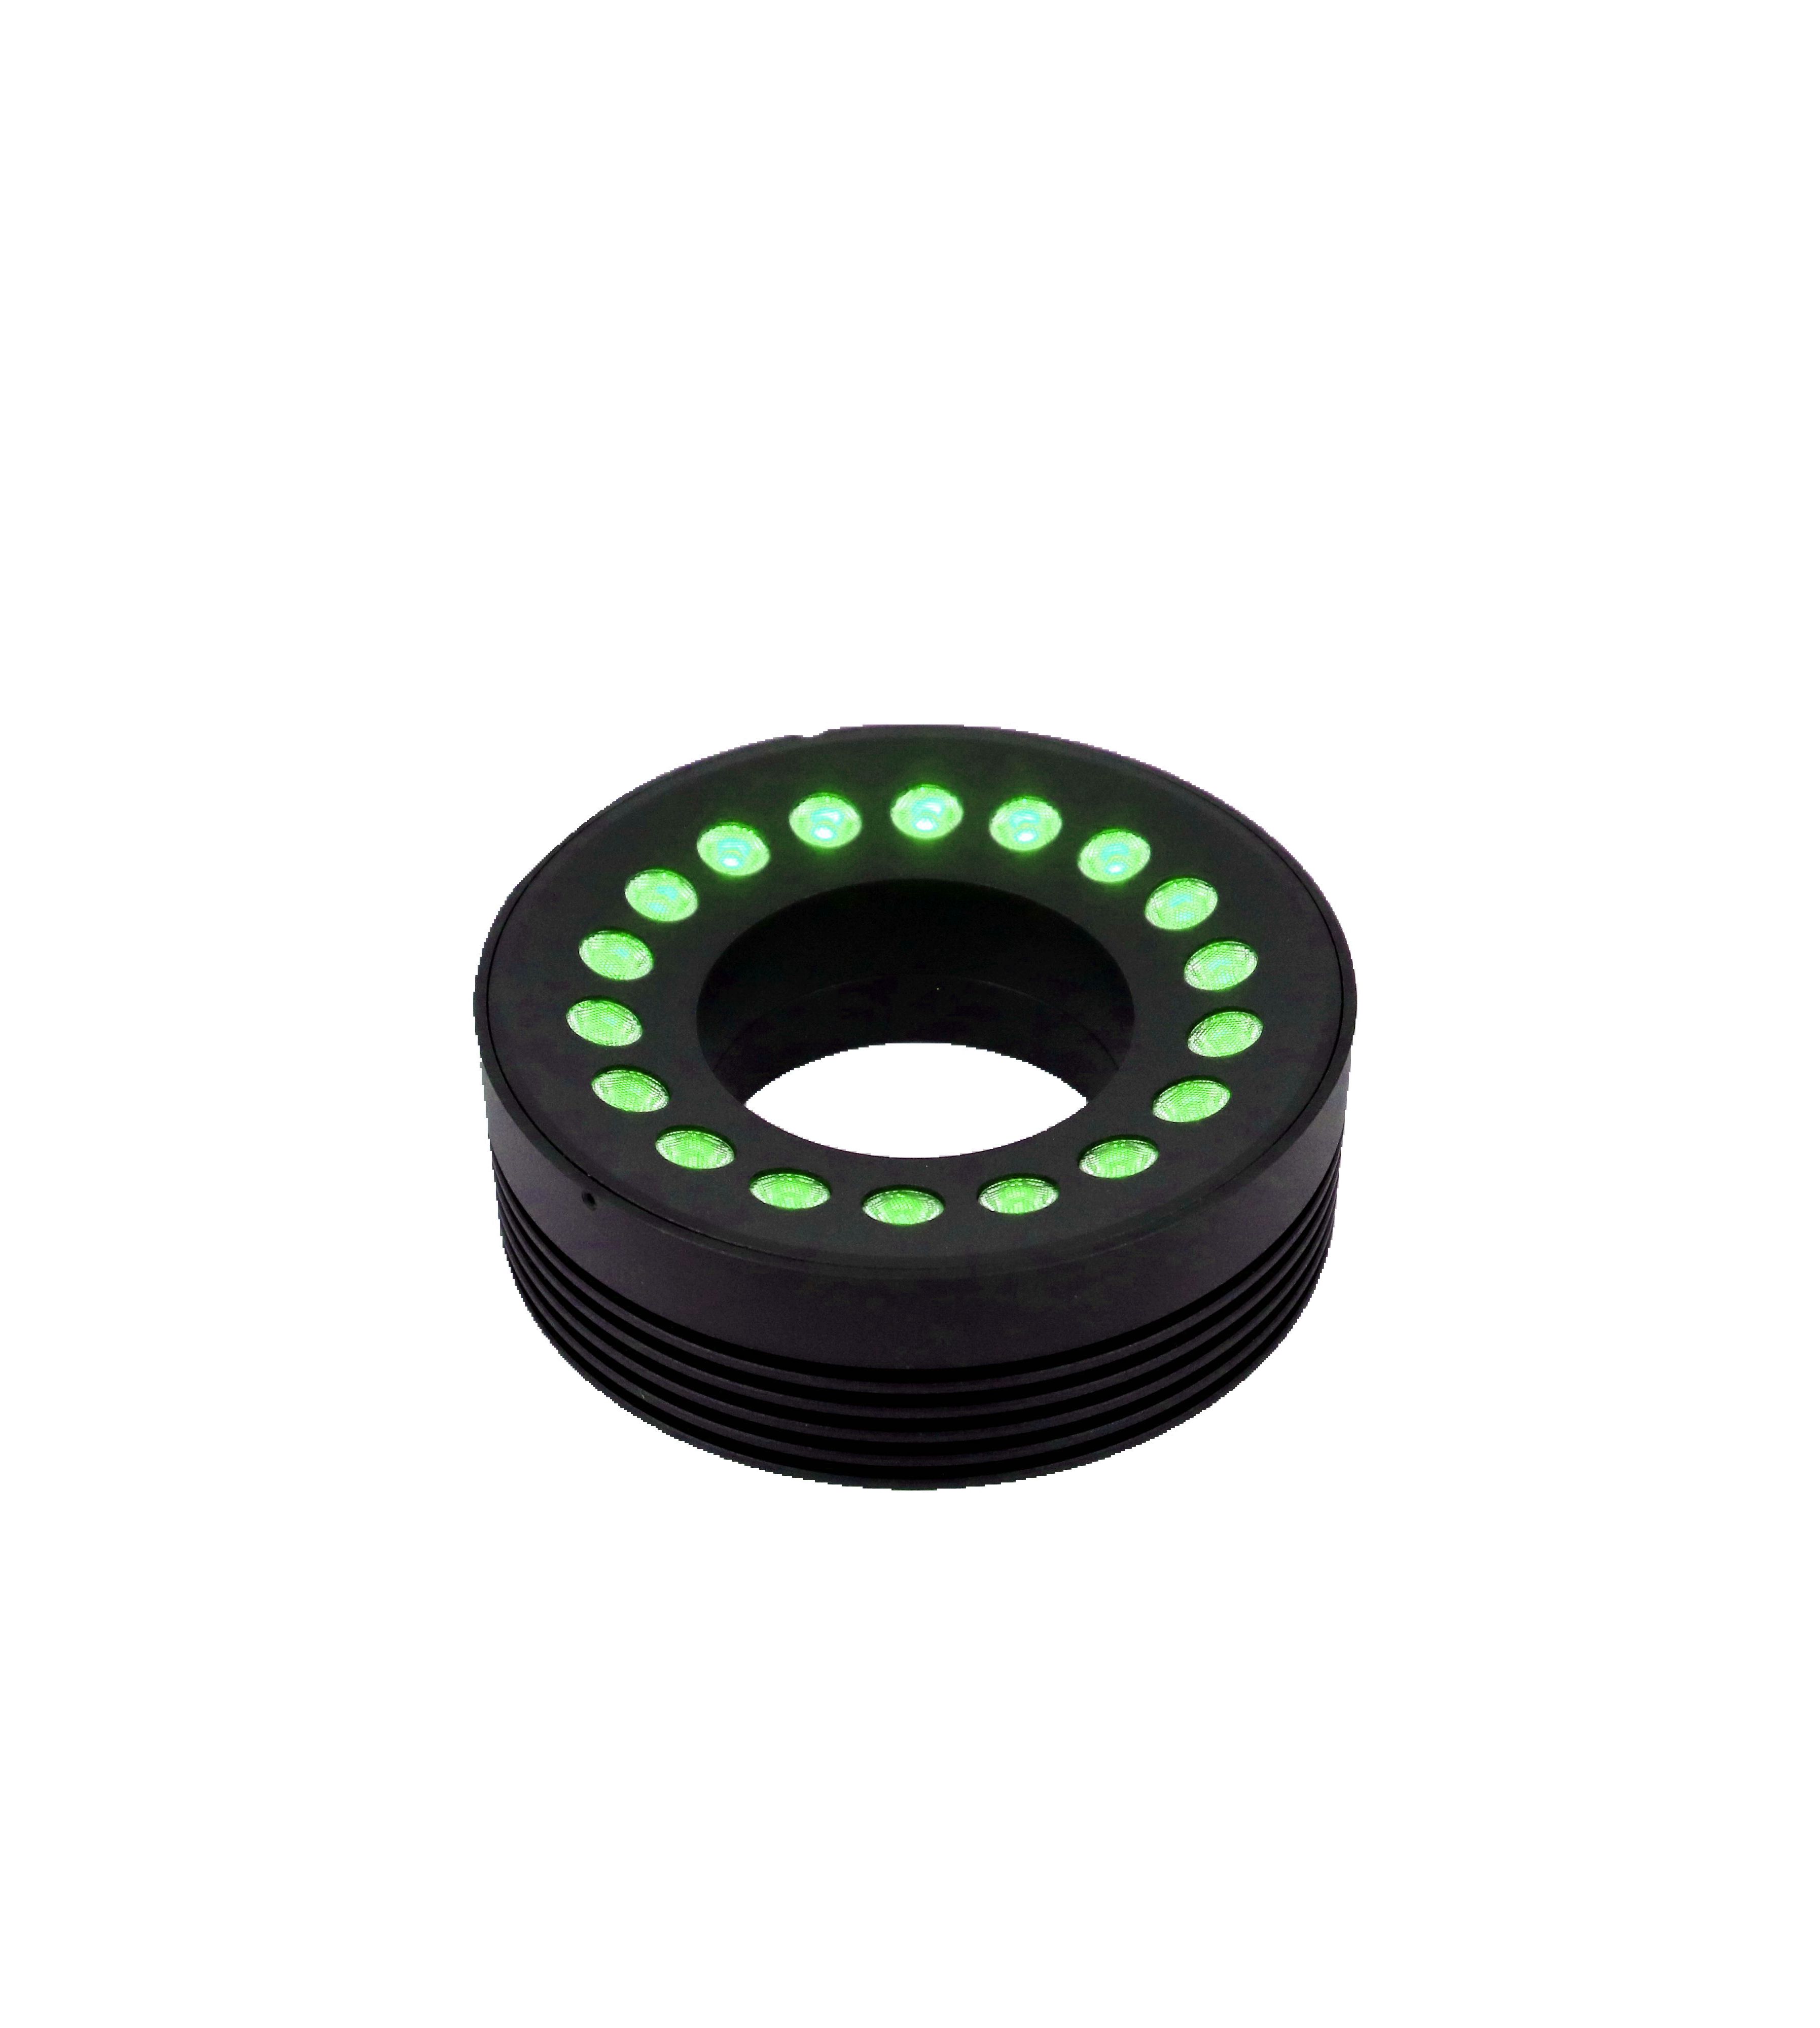 DRC-120/60 Direct Ring Series with High Power Illumination – Green